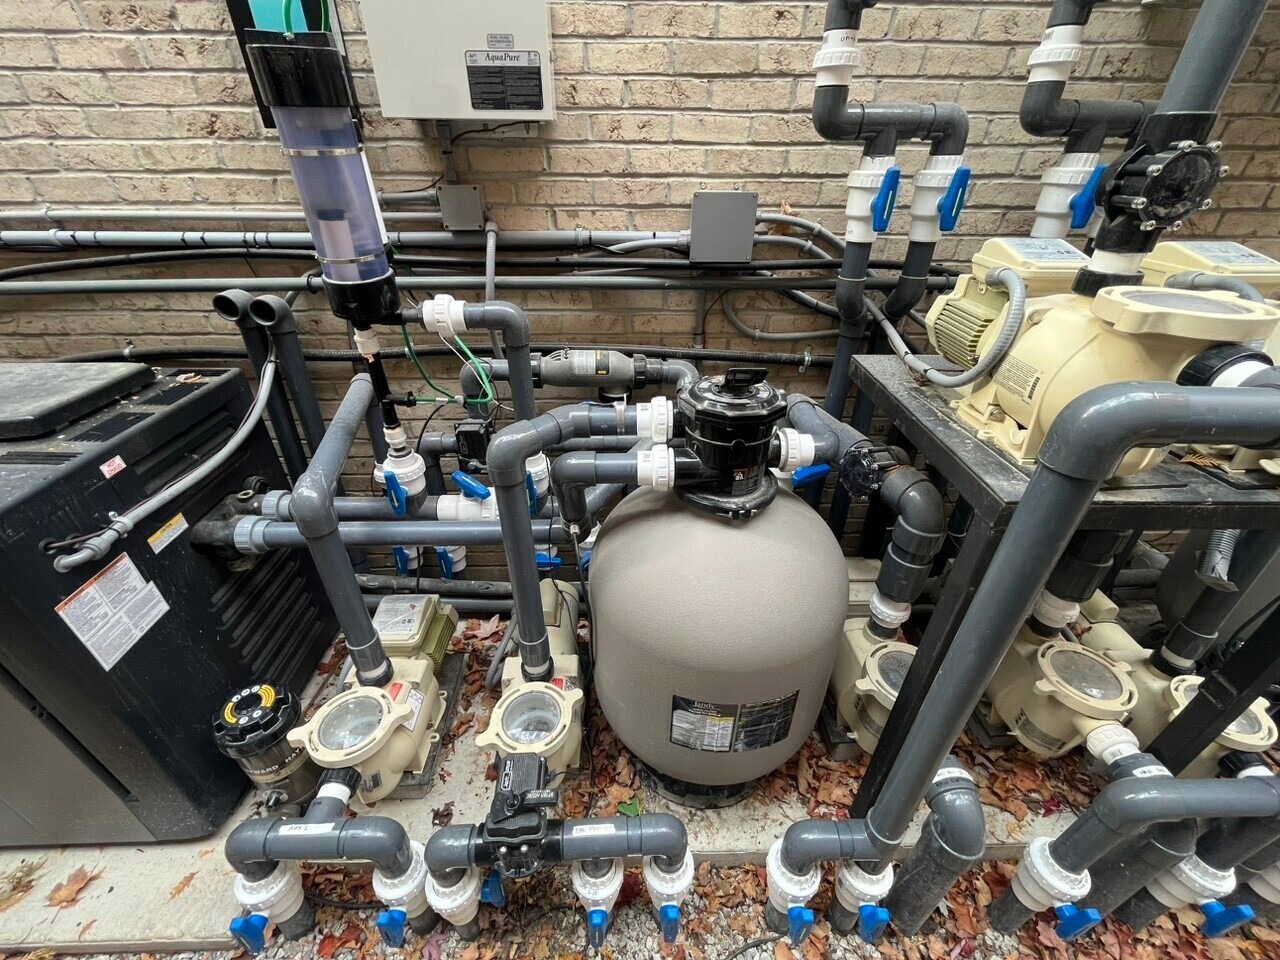 An intricate pool filtration system with pipes, pumps, and valves is set against a brick wall, appearing complex and engineered for water circulation.